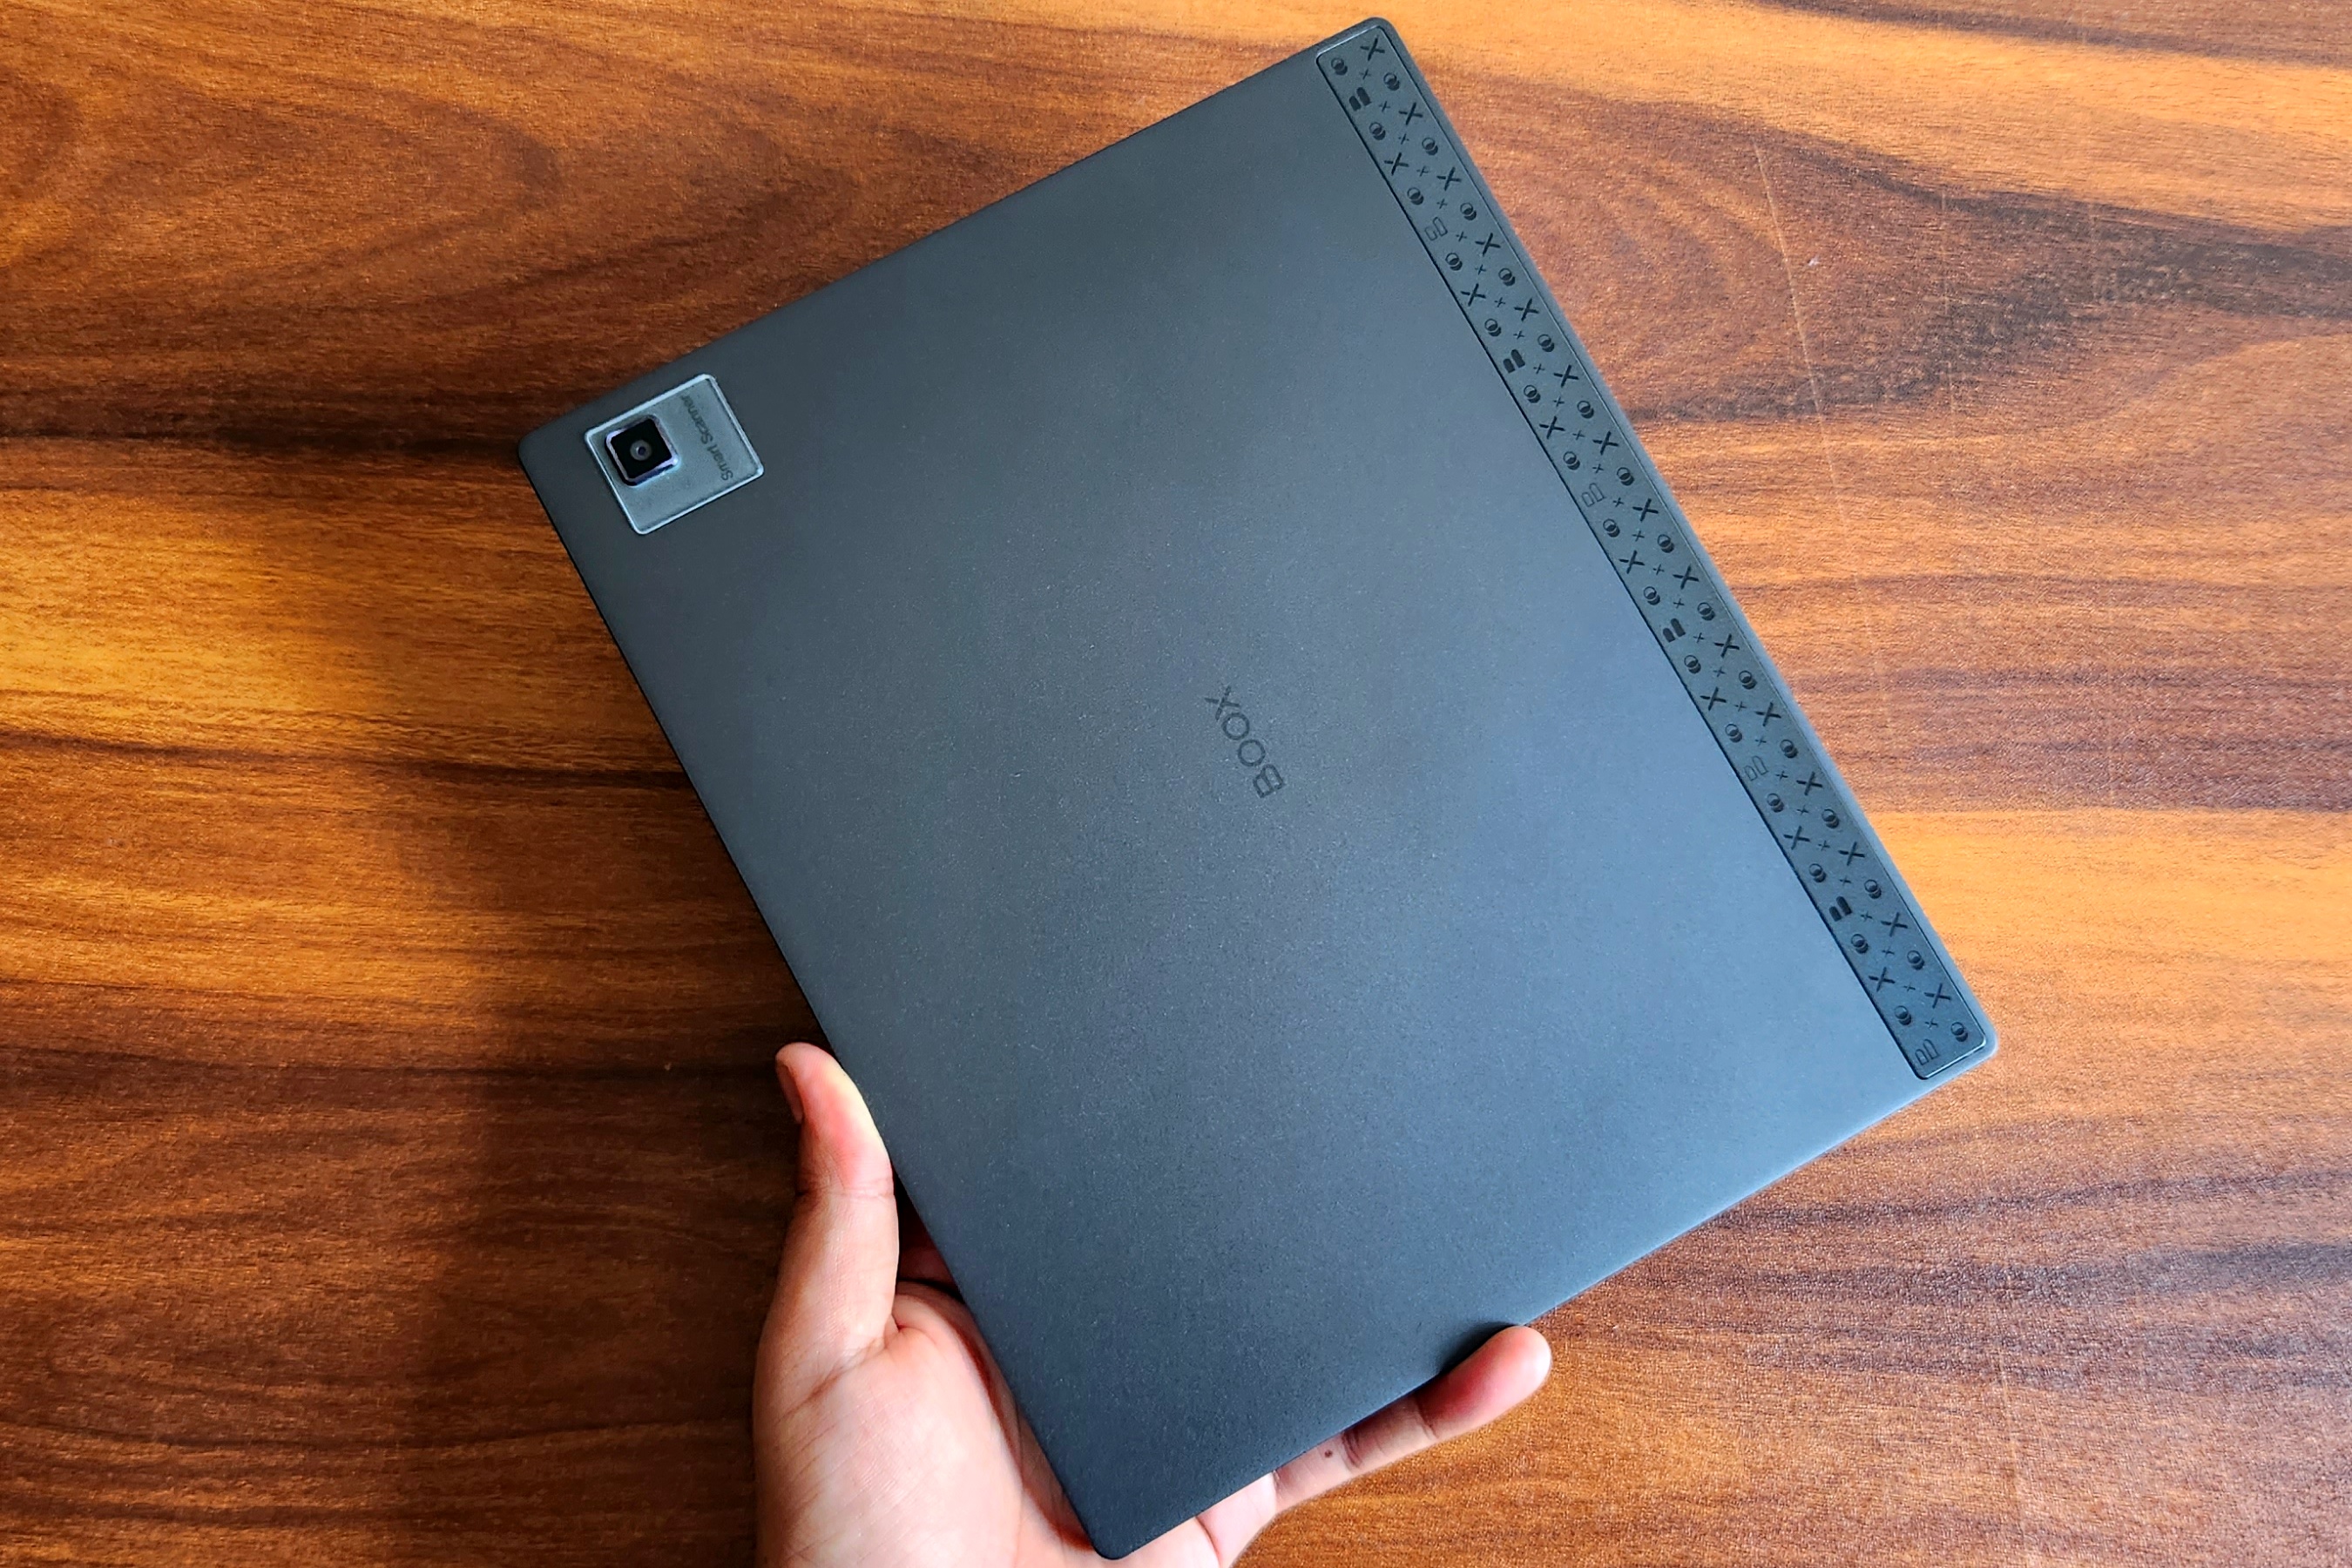 My first impressions of the Onyx Boox Tab Ultra C, by Cato Minor